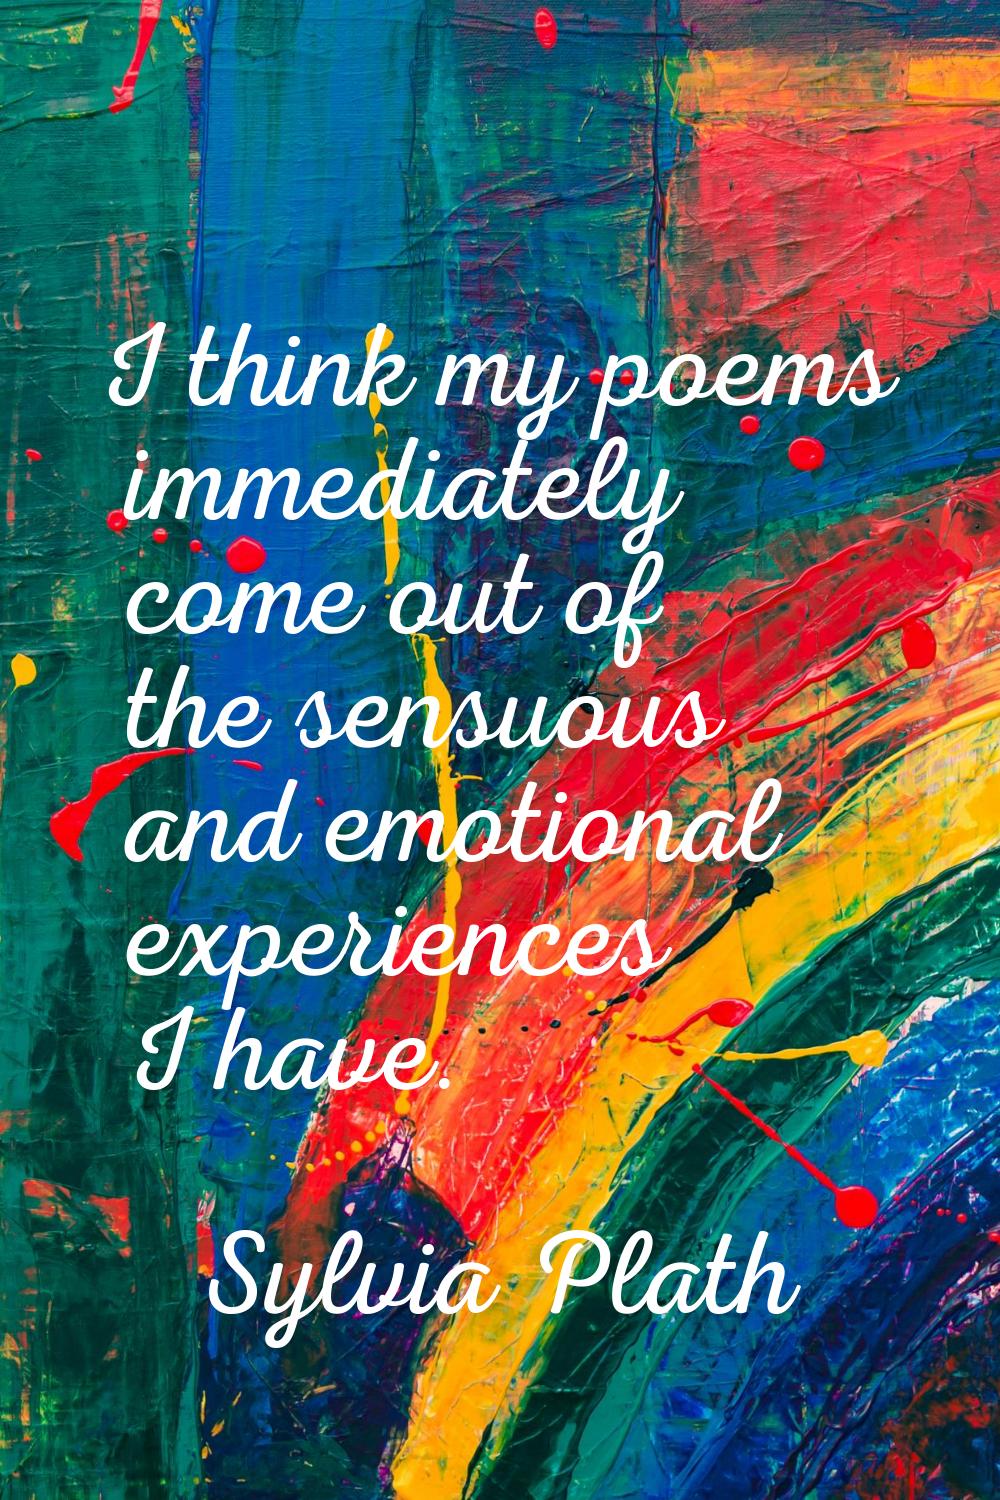 I think my poems immediately come out of the sensuous and emotional experiences I have.